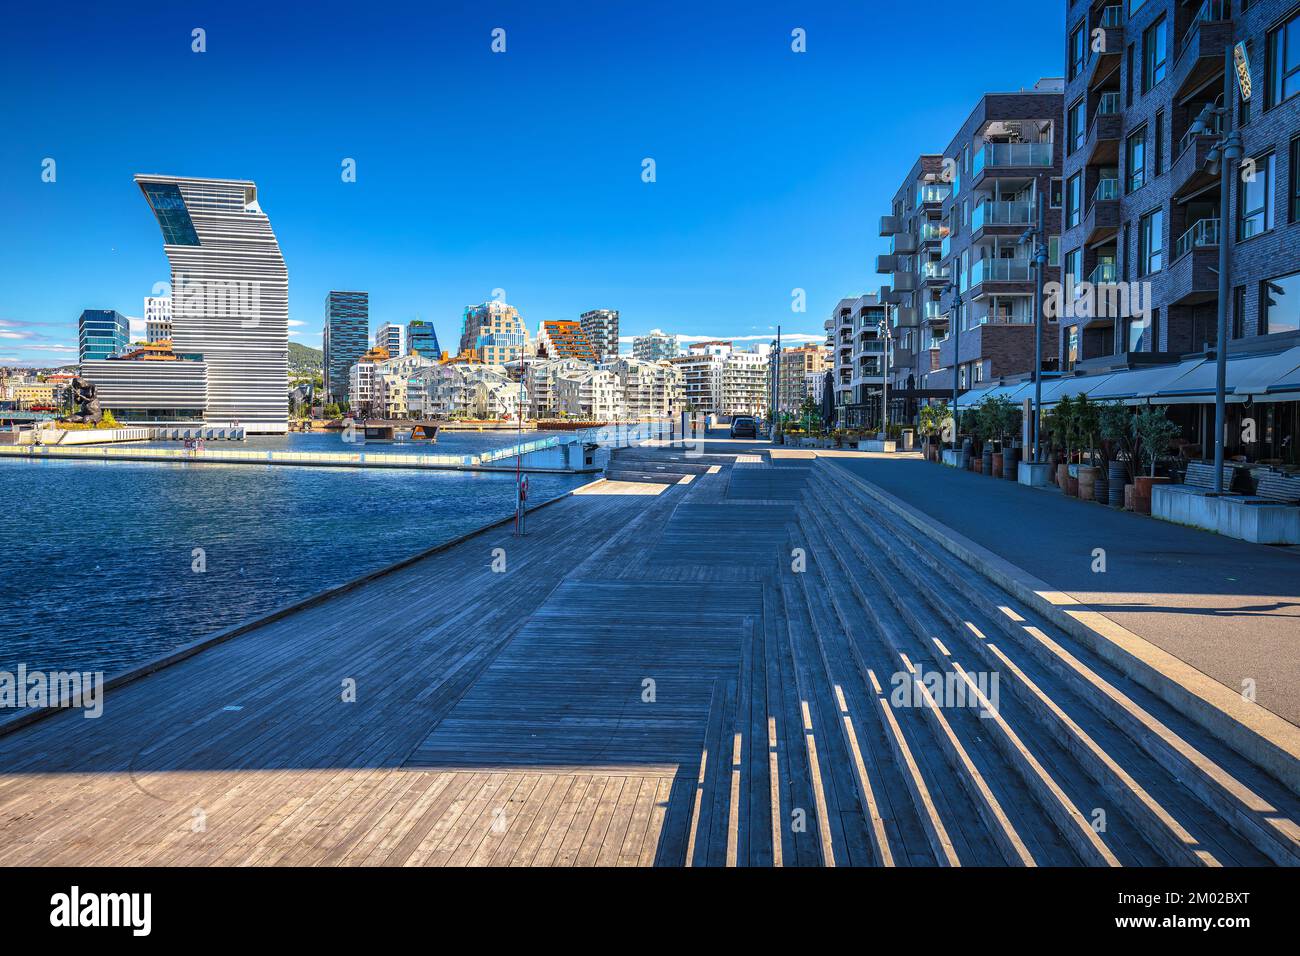 Contemporary architecture of Oslo waterfront promenade view, modern buildings in capital of Norway Stock Photo